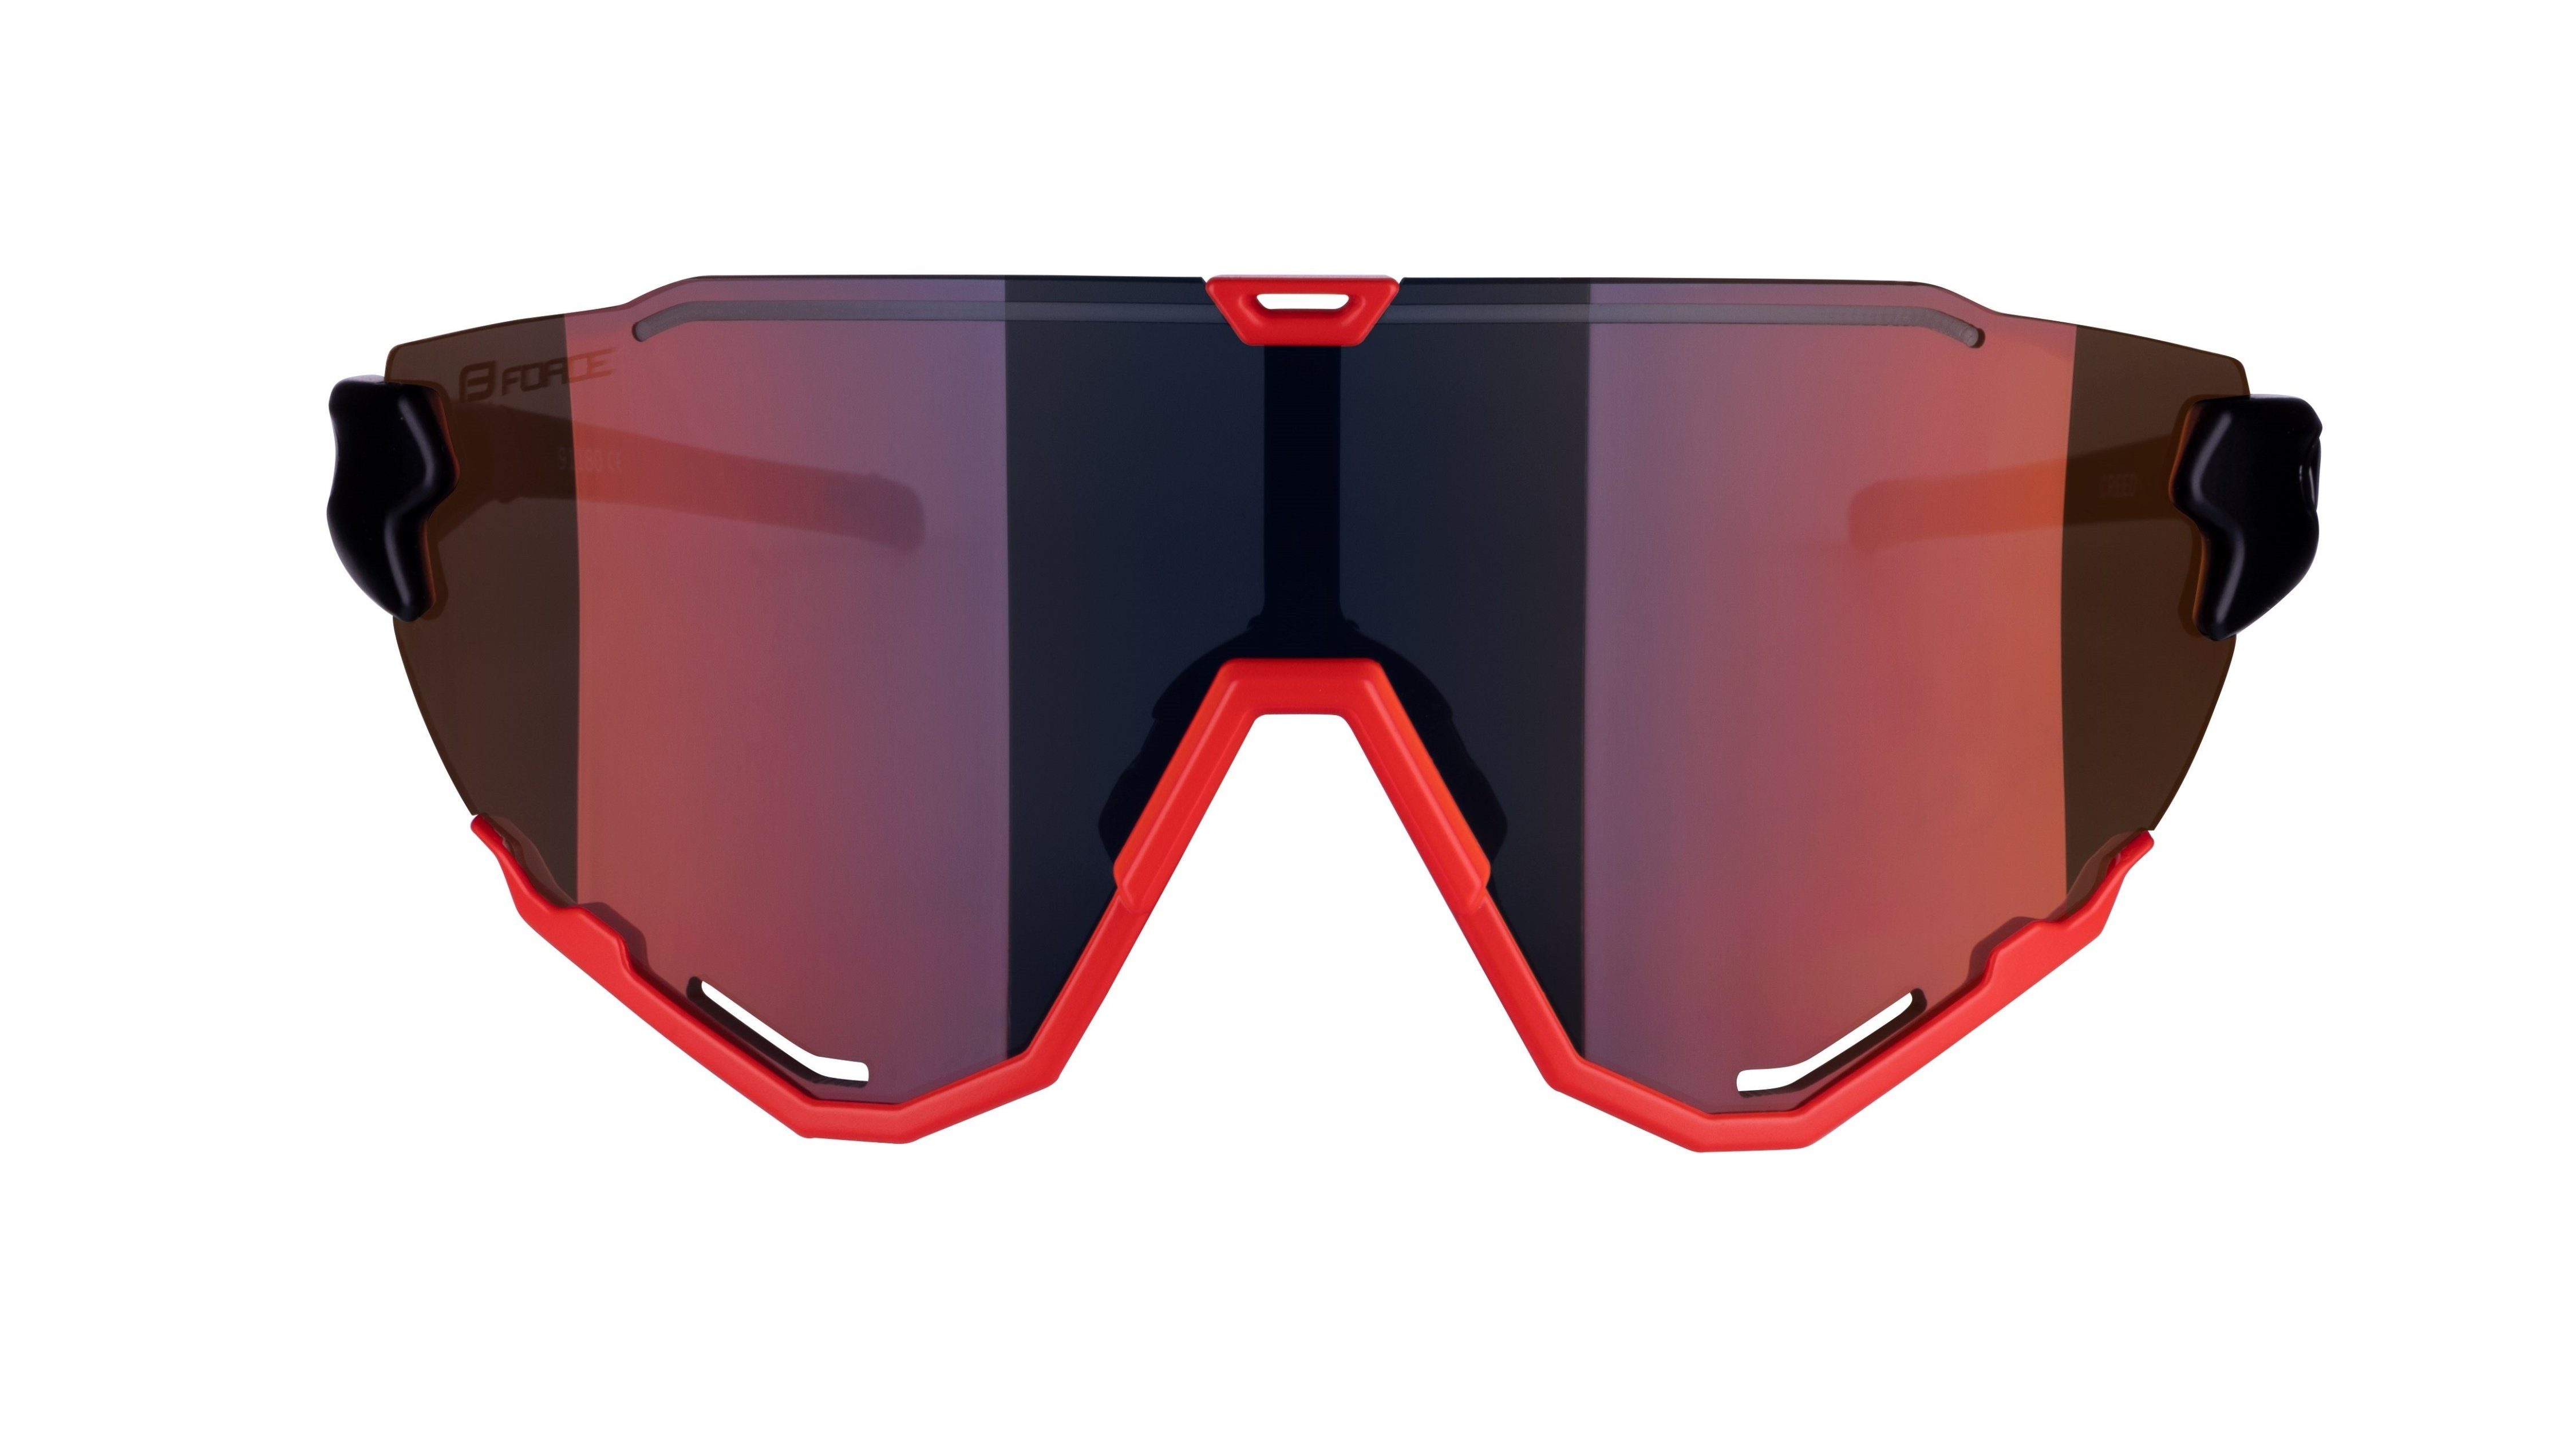 FORCE Fahrradbrille Sonnenbrille FORCE rote CREED Wechsel-Linsscheibe